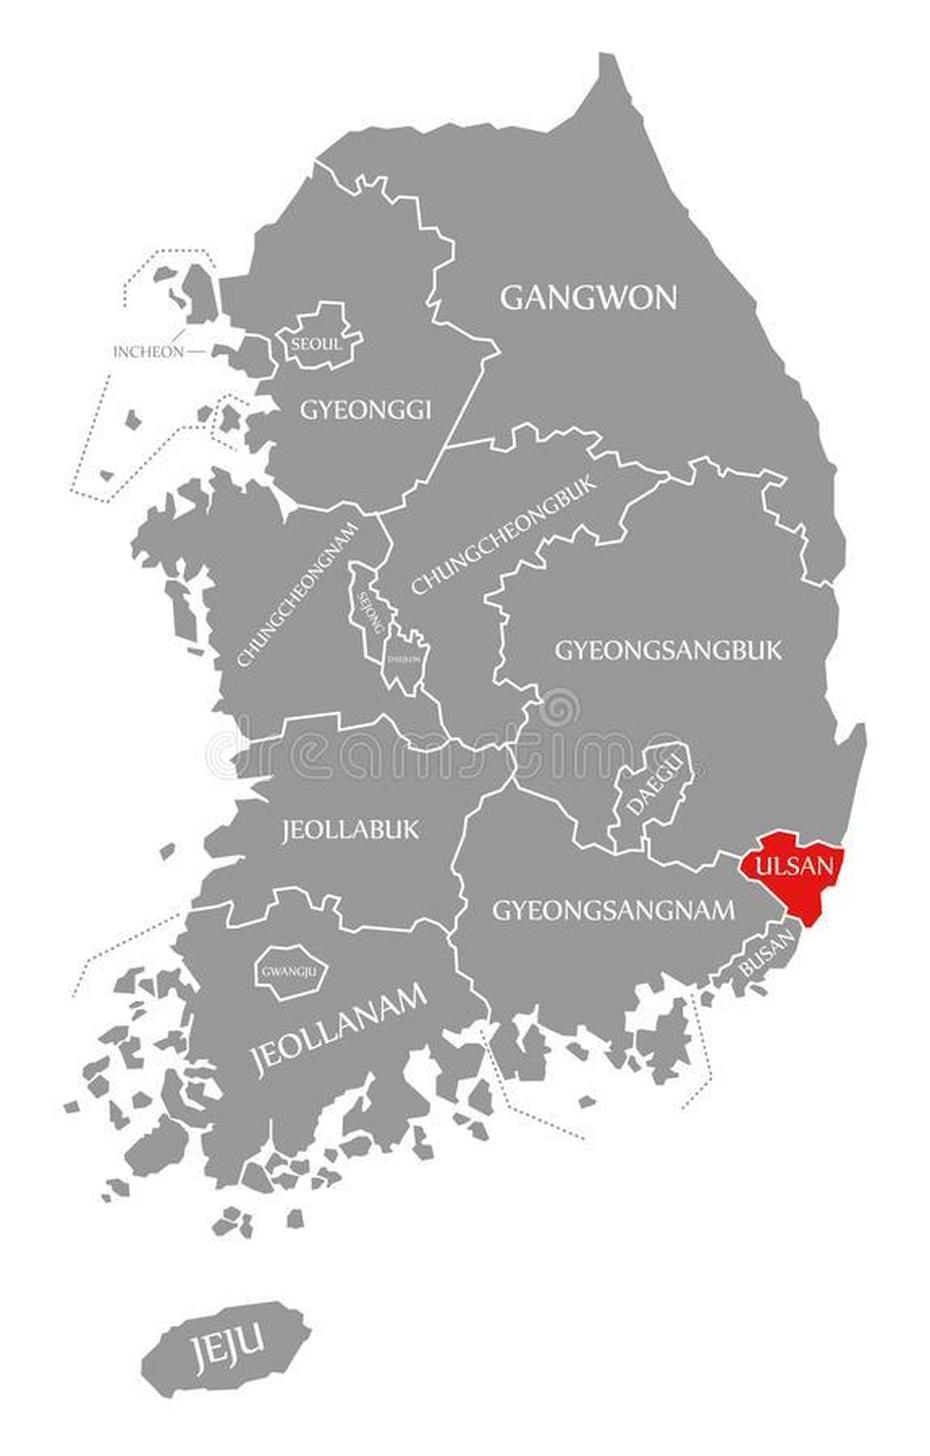 Ulsan Red Highlighted In Map Of South Korea  –   , : 166291295, Ulsan, South Korea, Pyeongchang South Korea, Gwangju